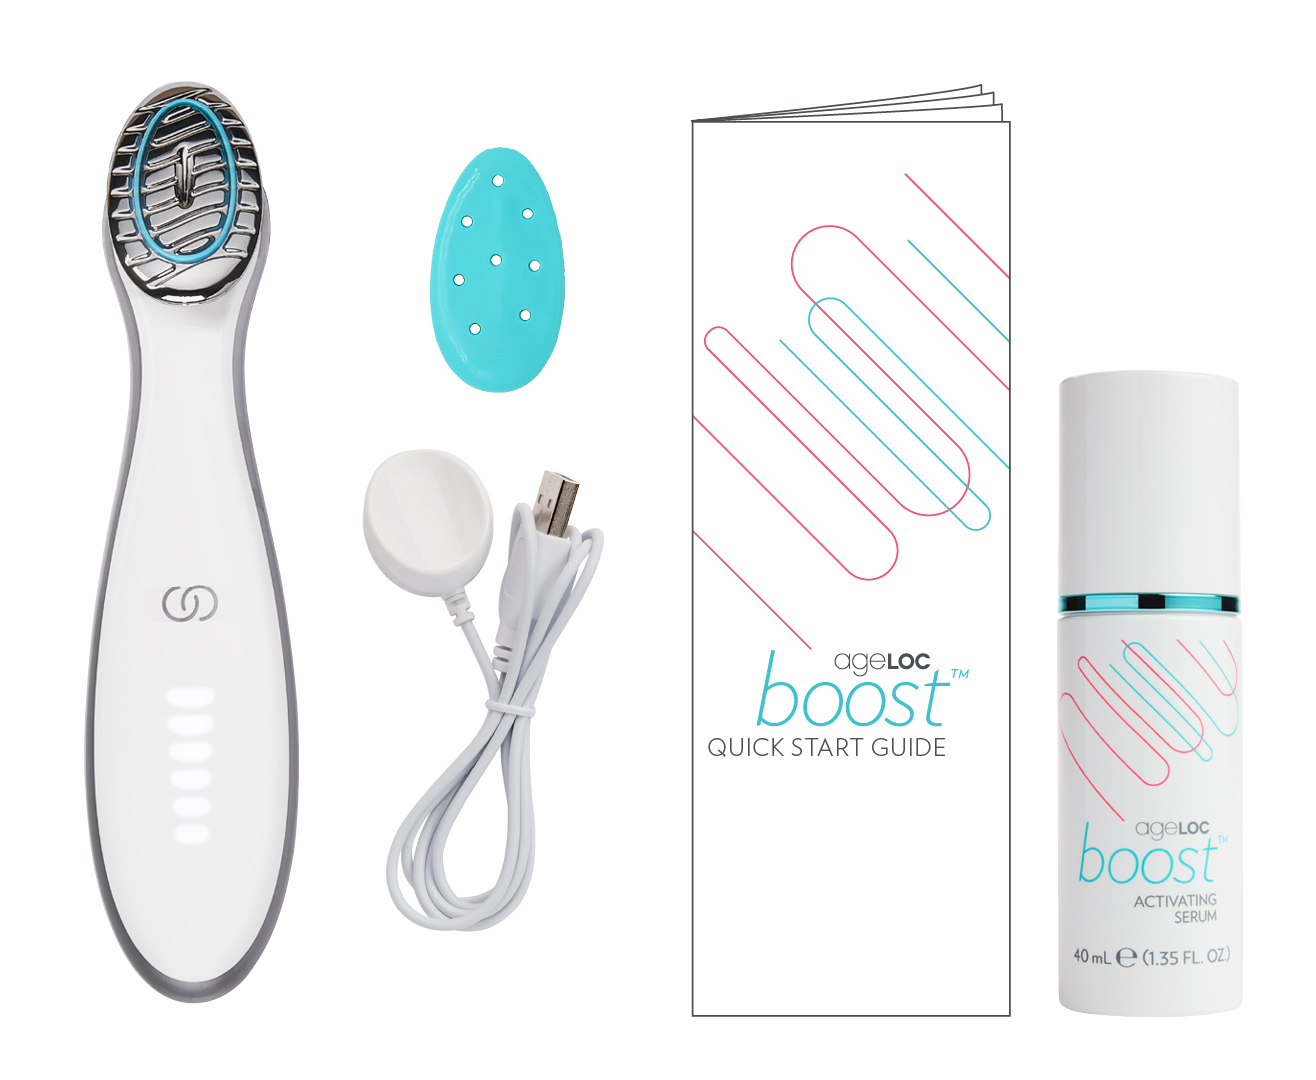 nu skin ageloc boost system packaging charger protective head image